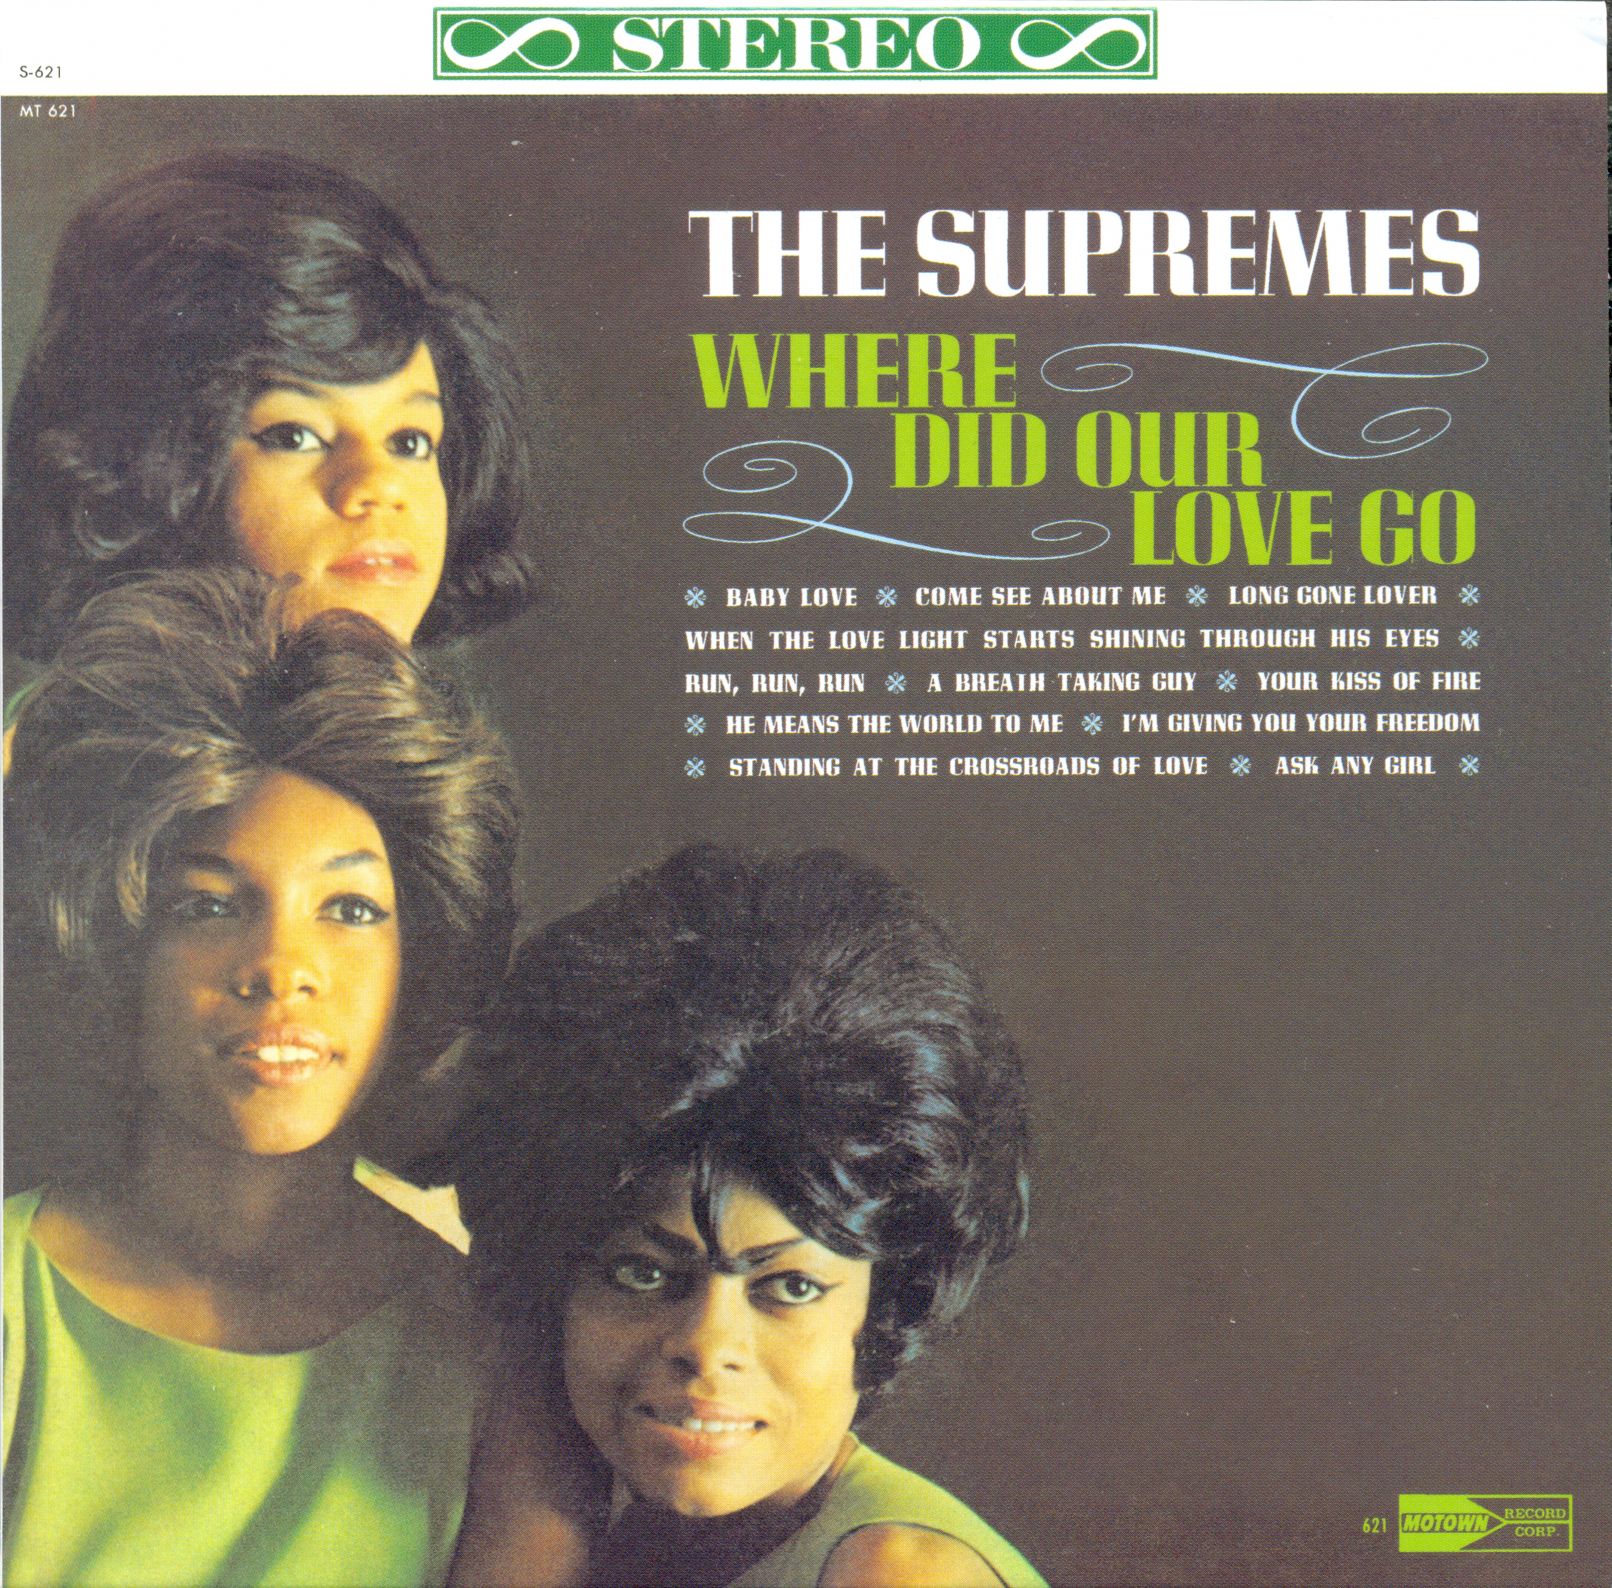 The Supremes - Where Did Our Love Go - 1964